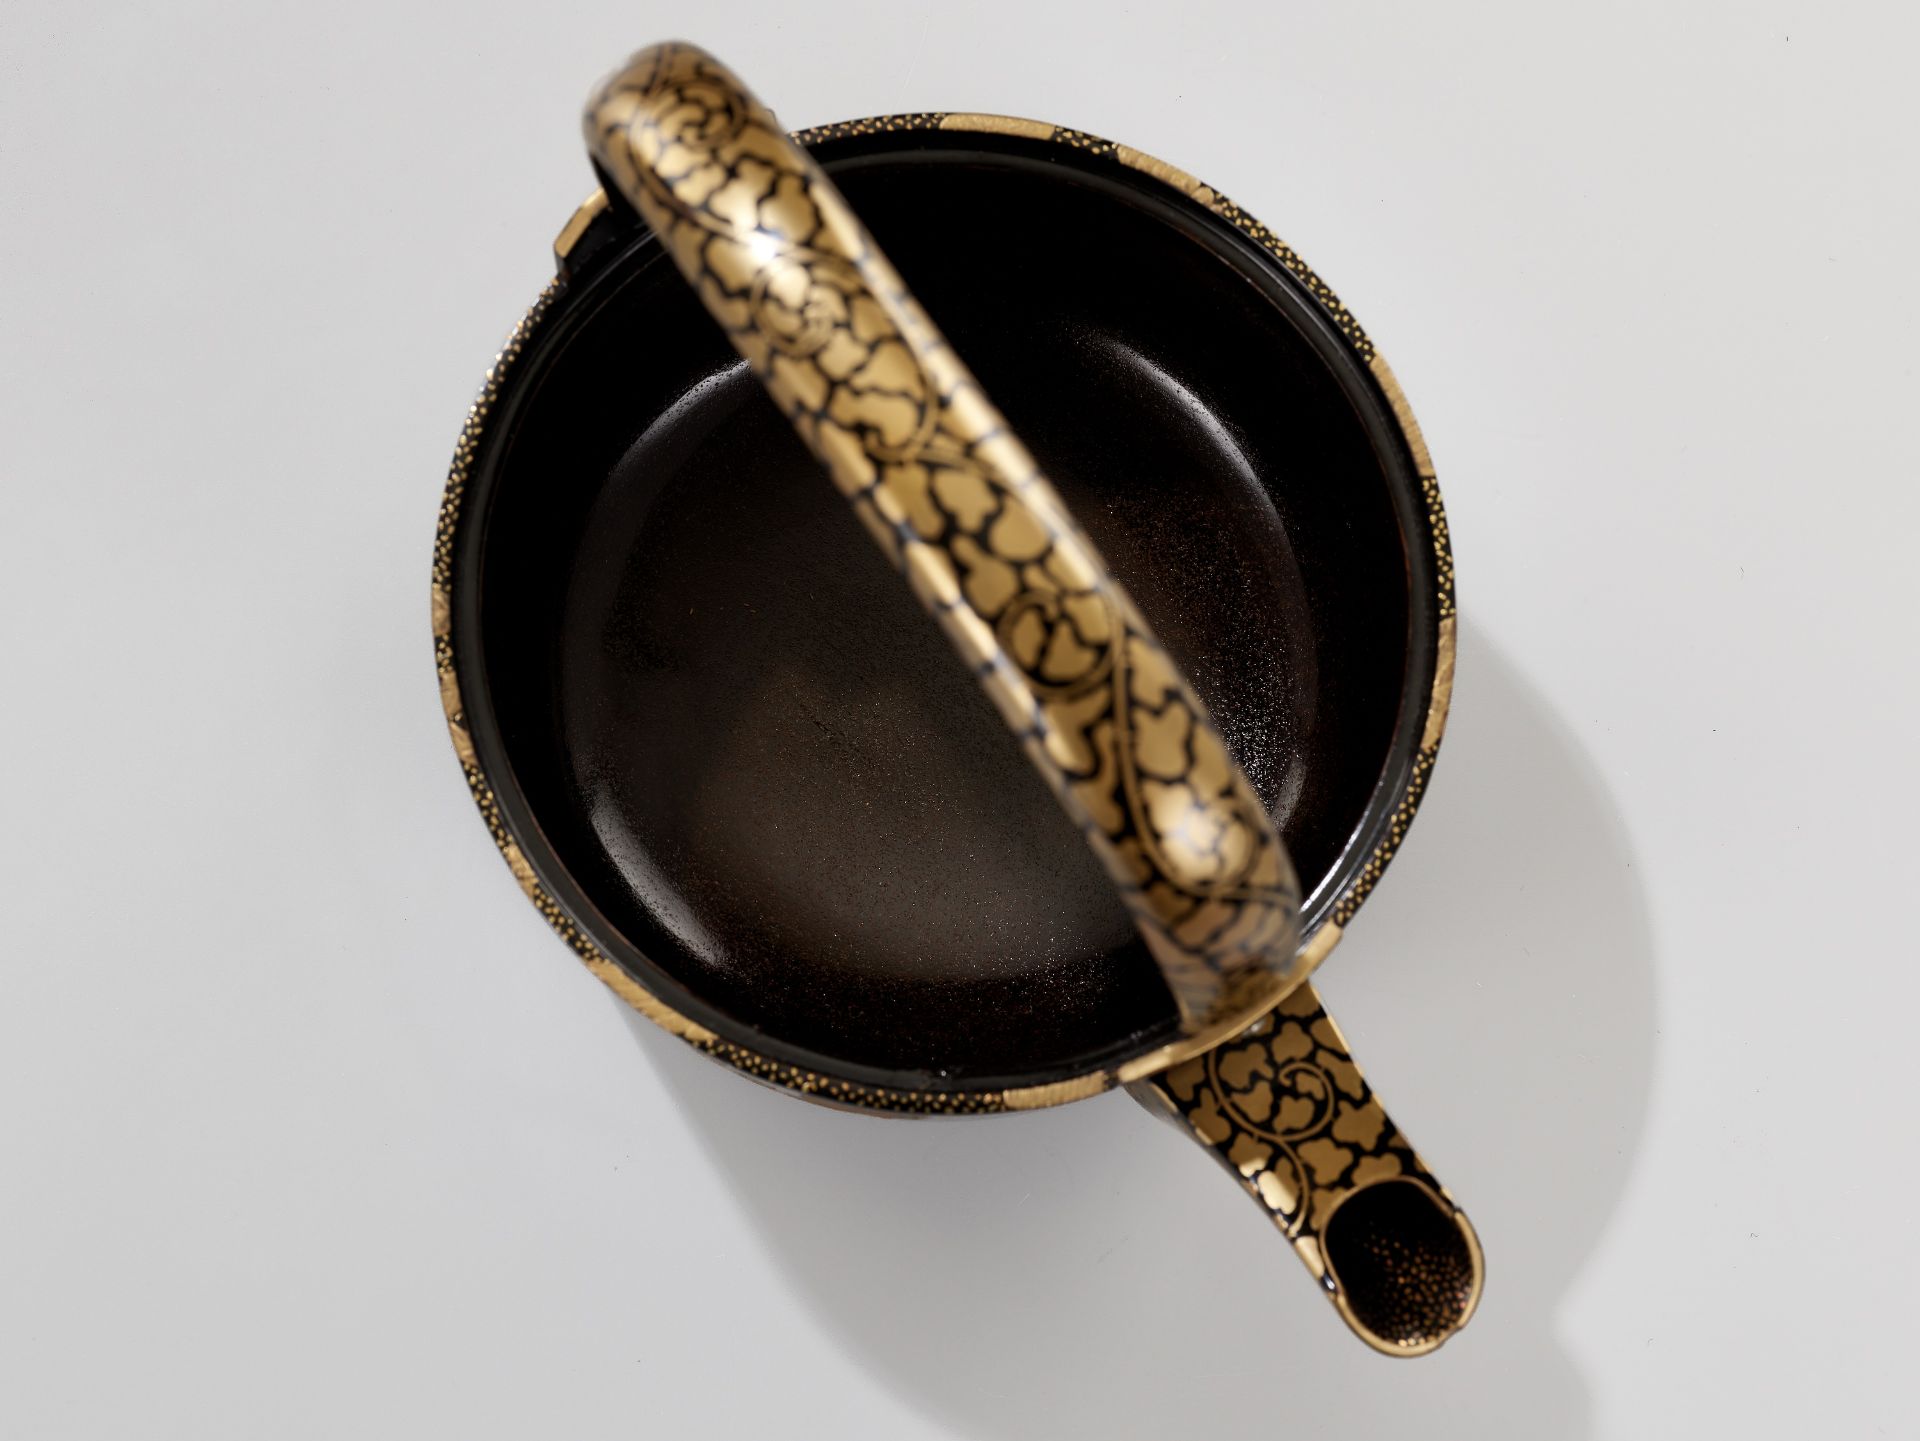 A PAIR OF BLACK AND GOLD LACQUER CHOSHI (SAKE EWERS) AND COVERS - Image 5 of 11